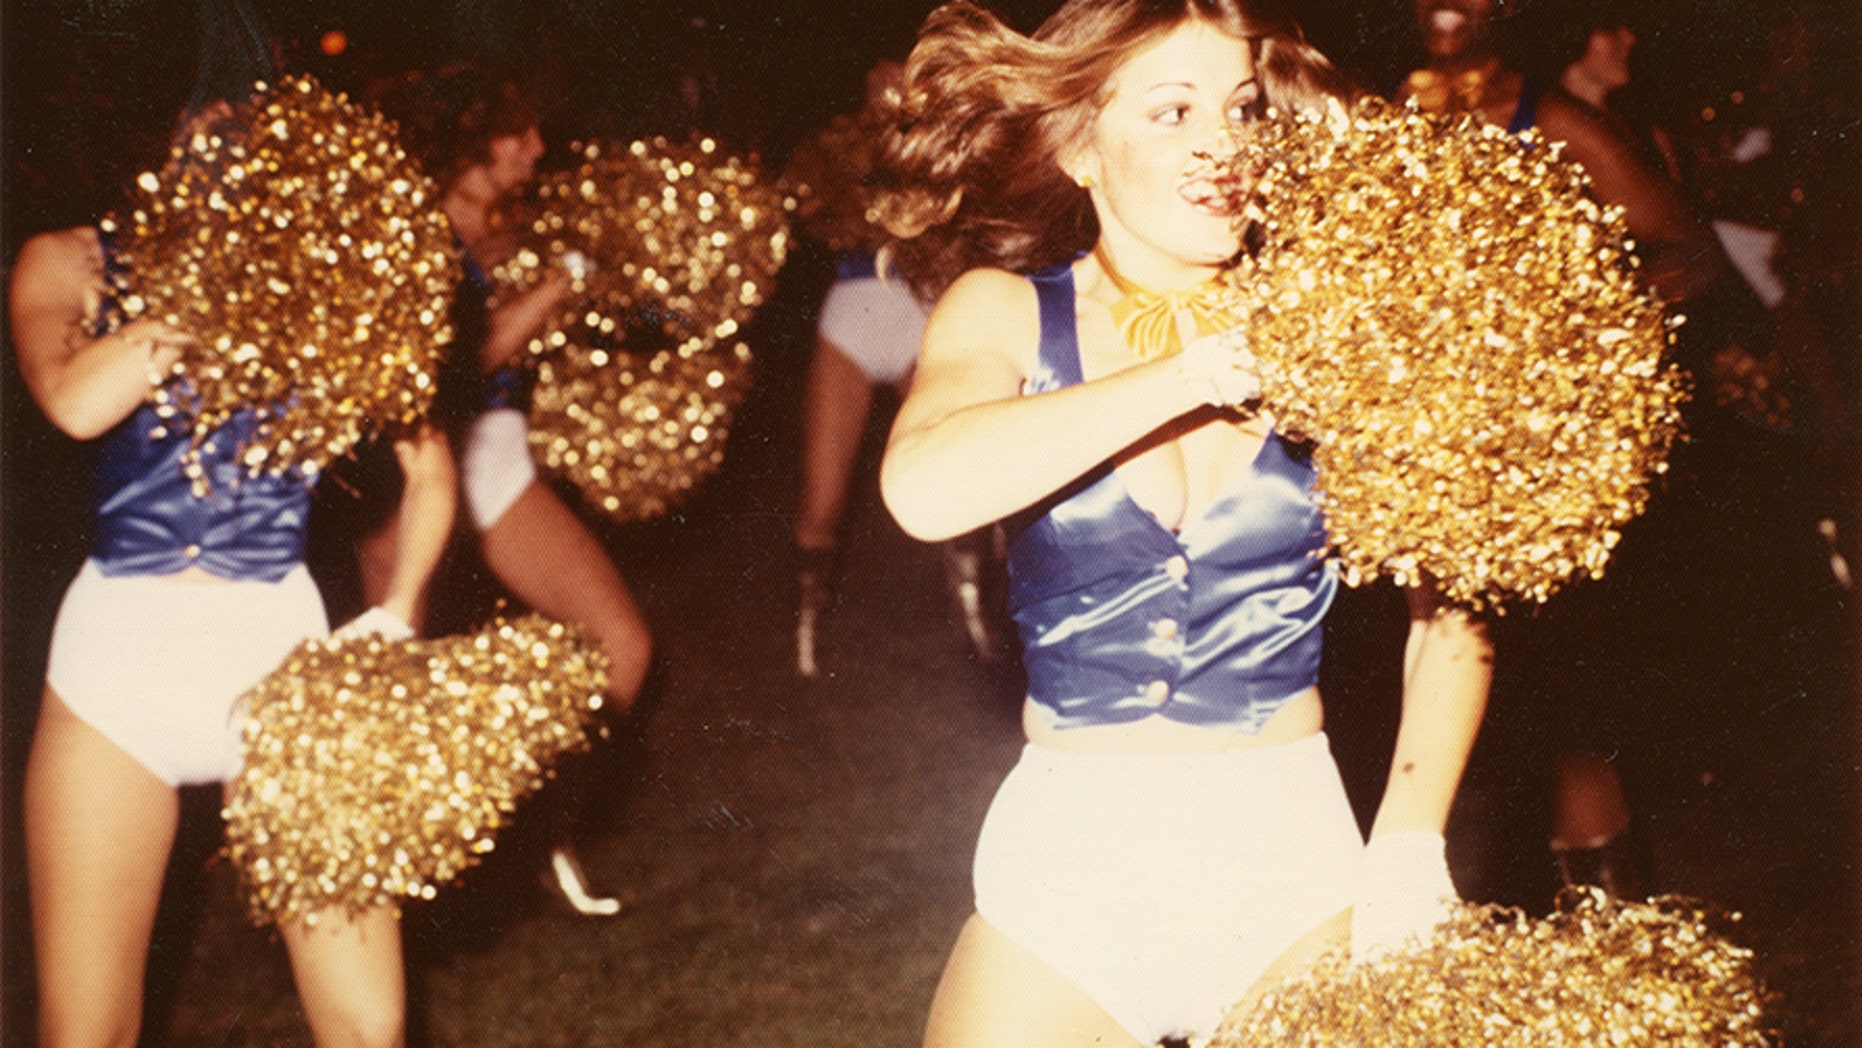 Former Chargettes cheerleader recalls Playboy scandal in doc: ‘I spent 40 years of my life with guilt’